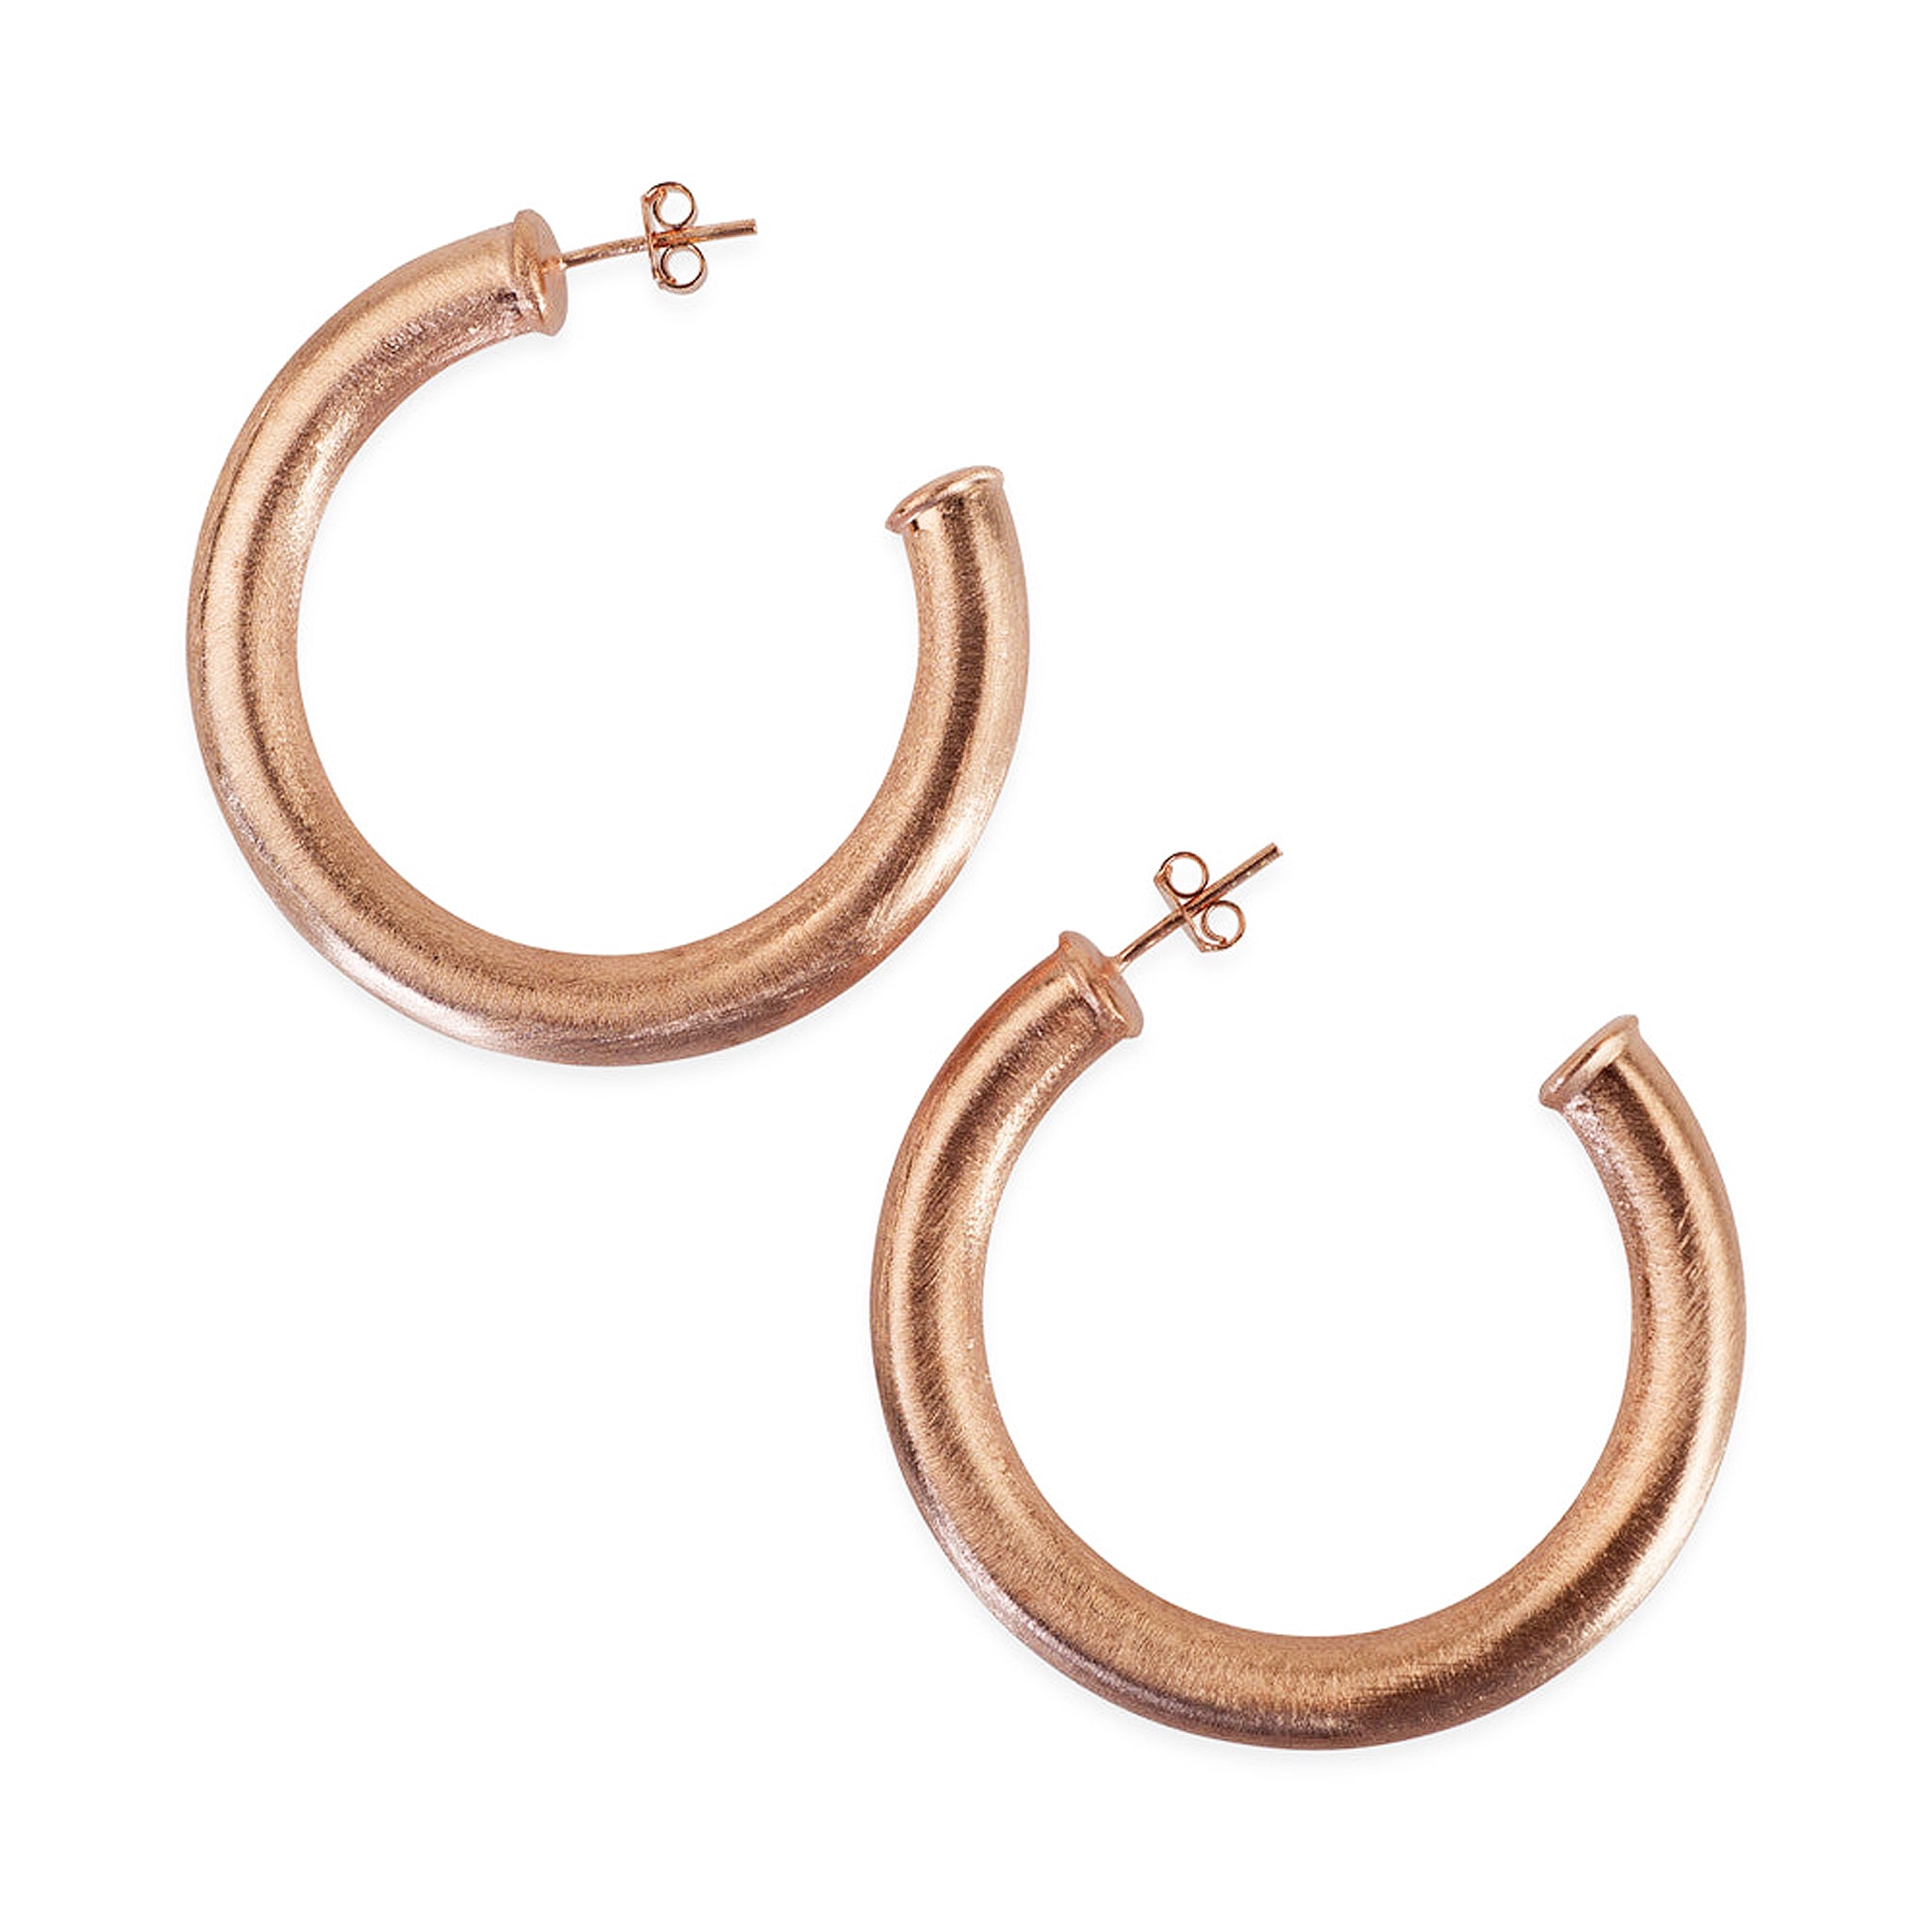 Sheila Fajl Thick Chantal Hoop Earrings in Brushed Rose Gold Plated